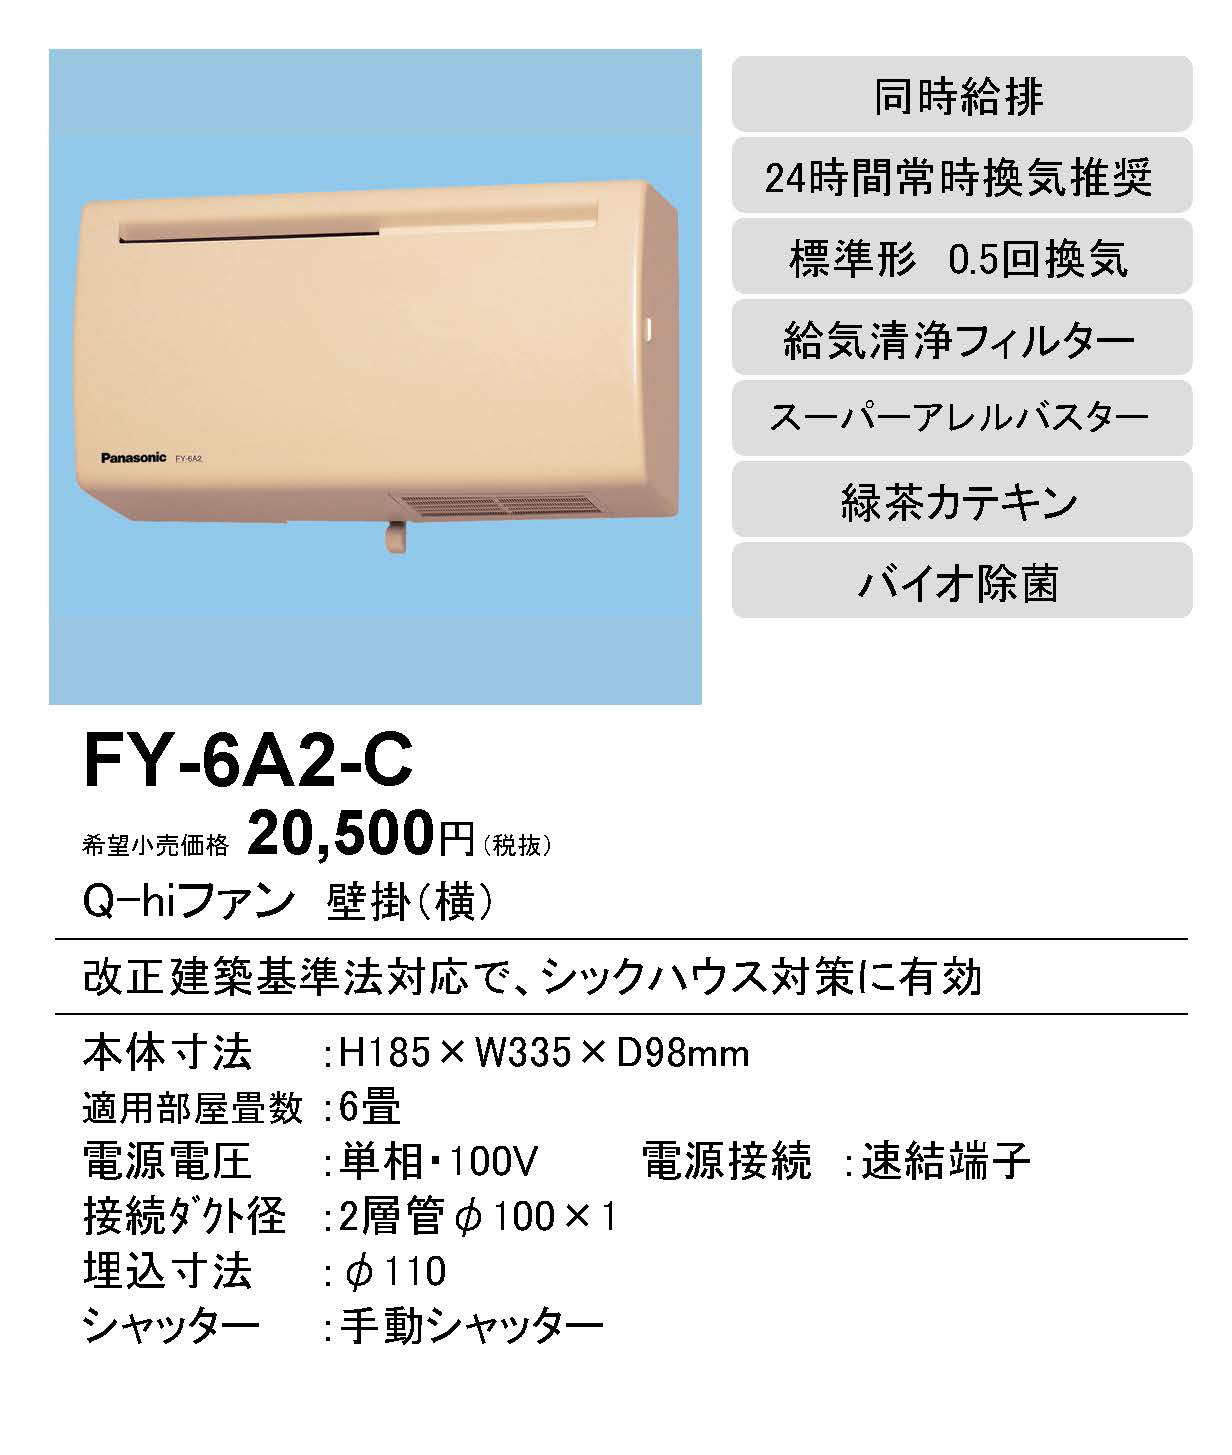 FY-6A2-C